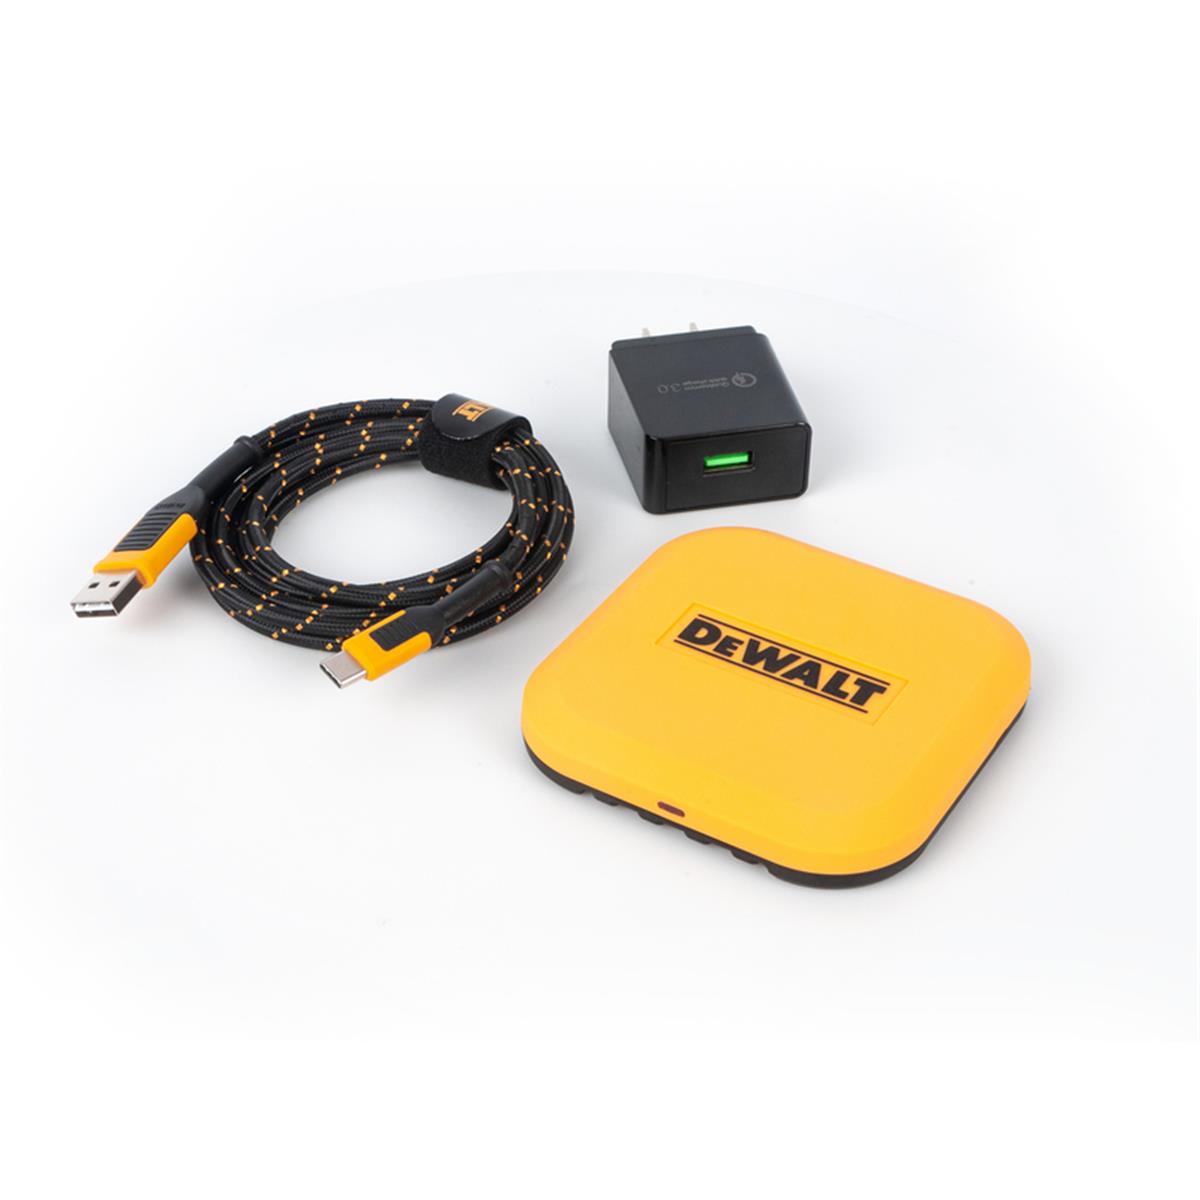 Picture of Dewalt 3003450 Black & Yellow Fast Wireless Charging Pad for Smartphones